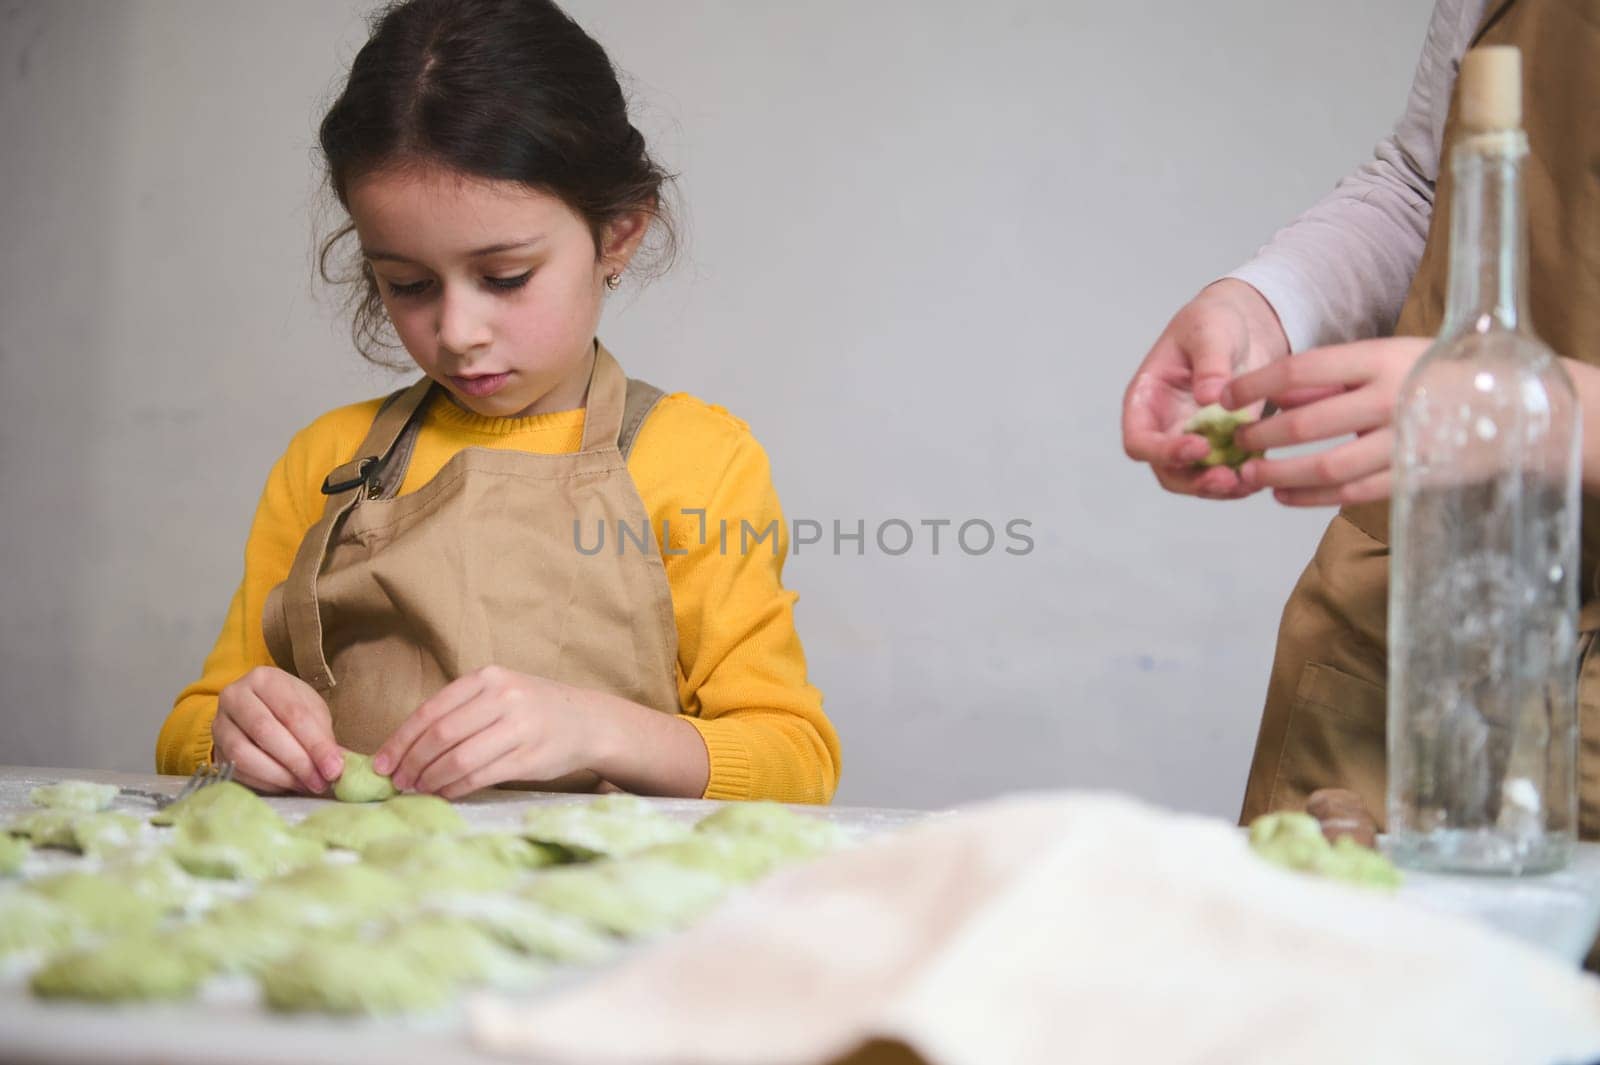 Children learn making dumplings during a cooking class. Preparing homemade varennyky according to traditional Ukrainian recipe. Close-up little kid girl sculpting dumpling, standing at floured table